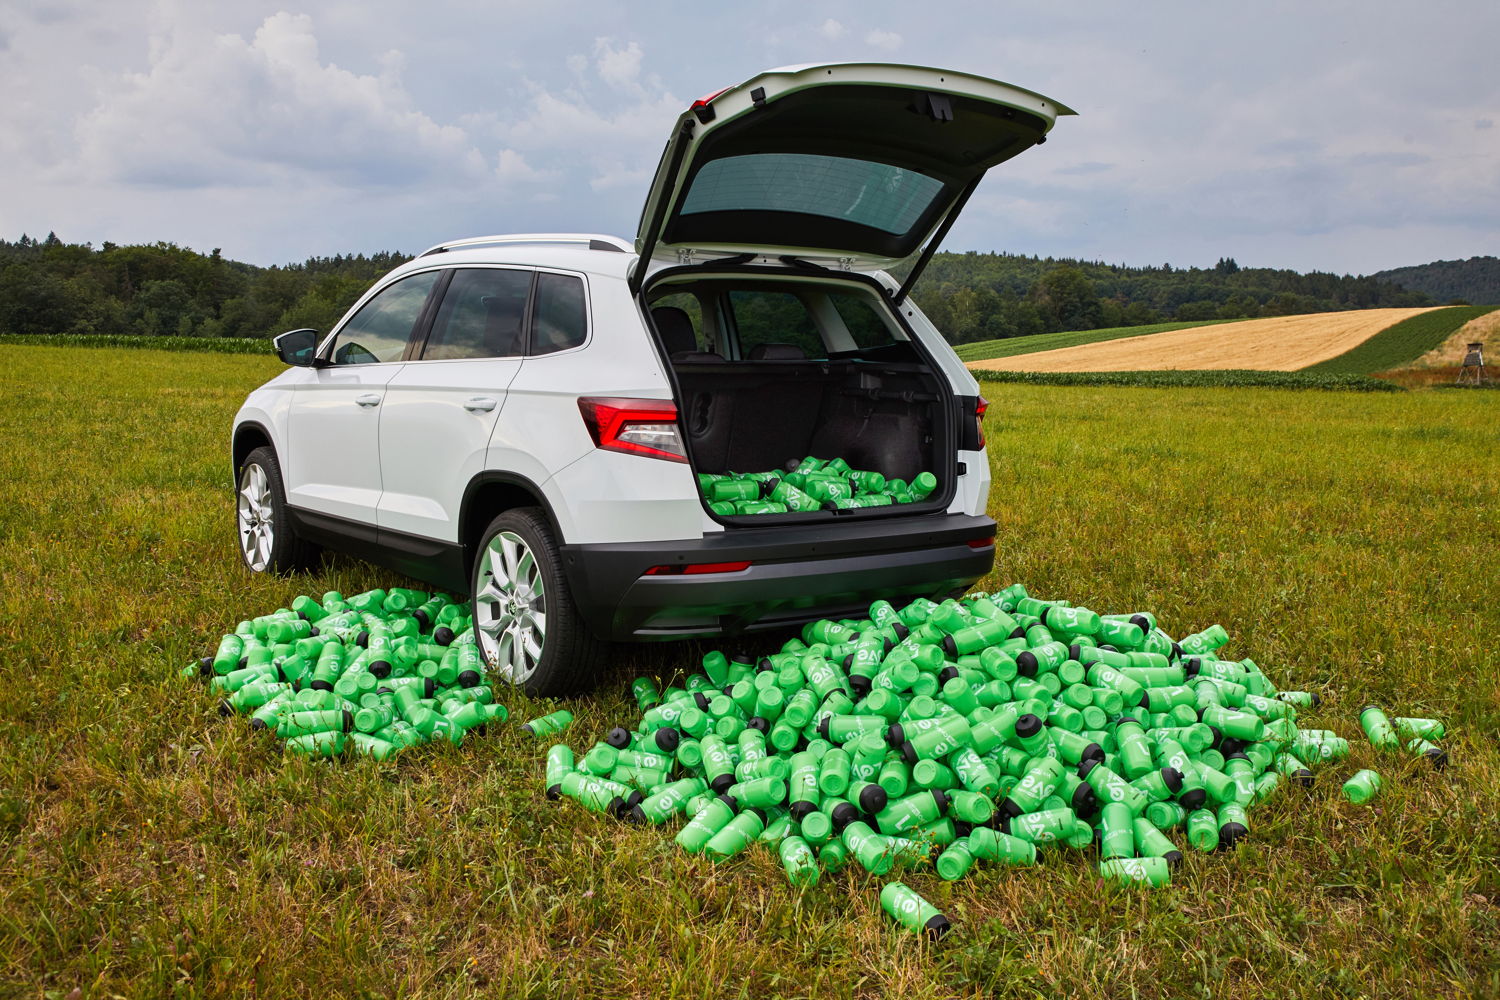 Bidons pave their way – each team goes through 1000 bottles a week during the Tour de France. The cargo space of ŠKODA KAROQ provides enough space for this number of thirst quenchers.